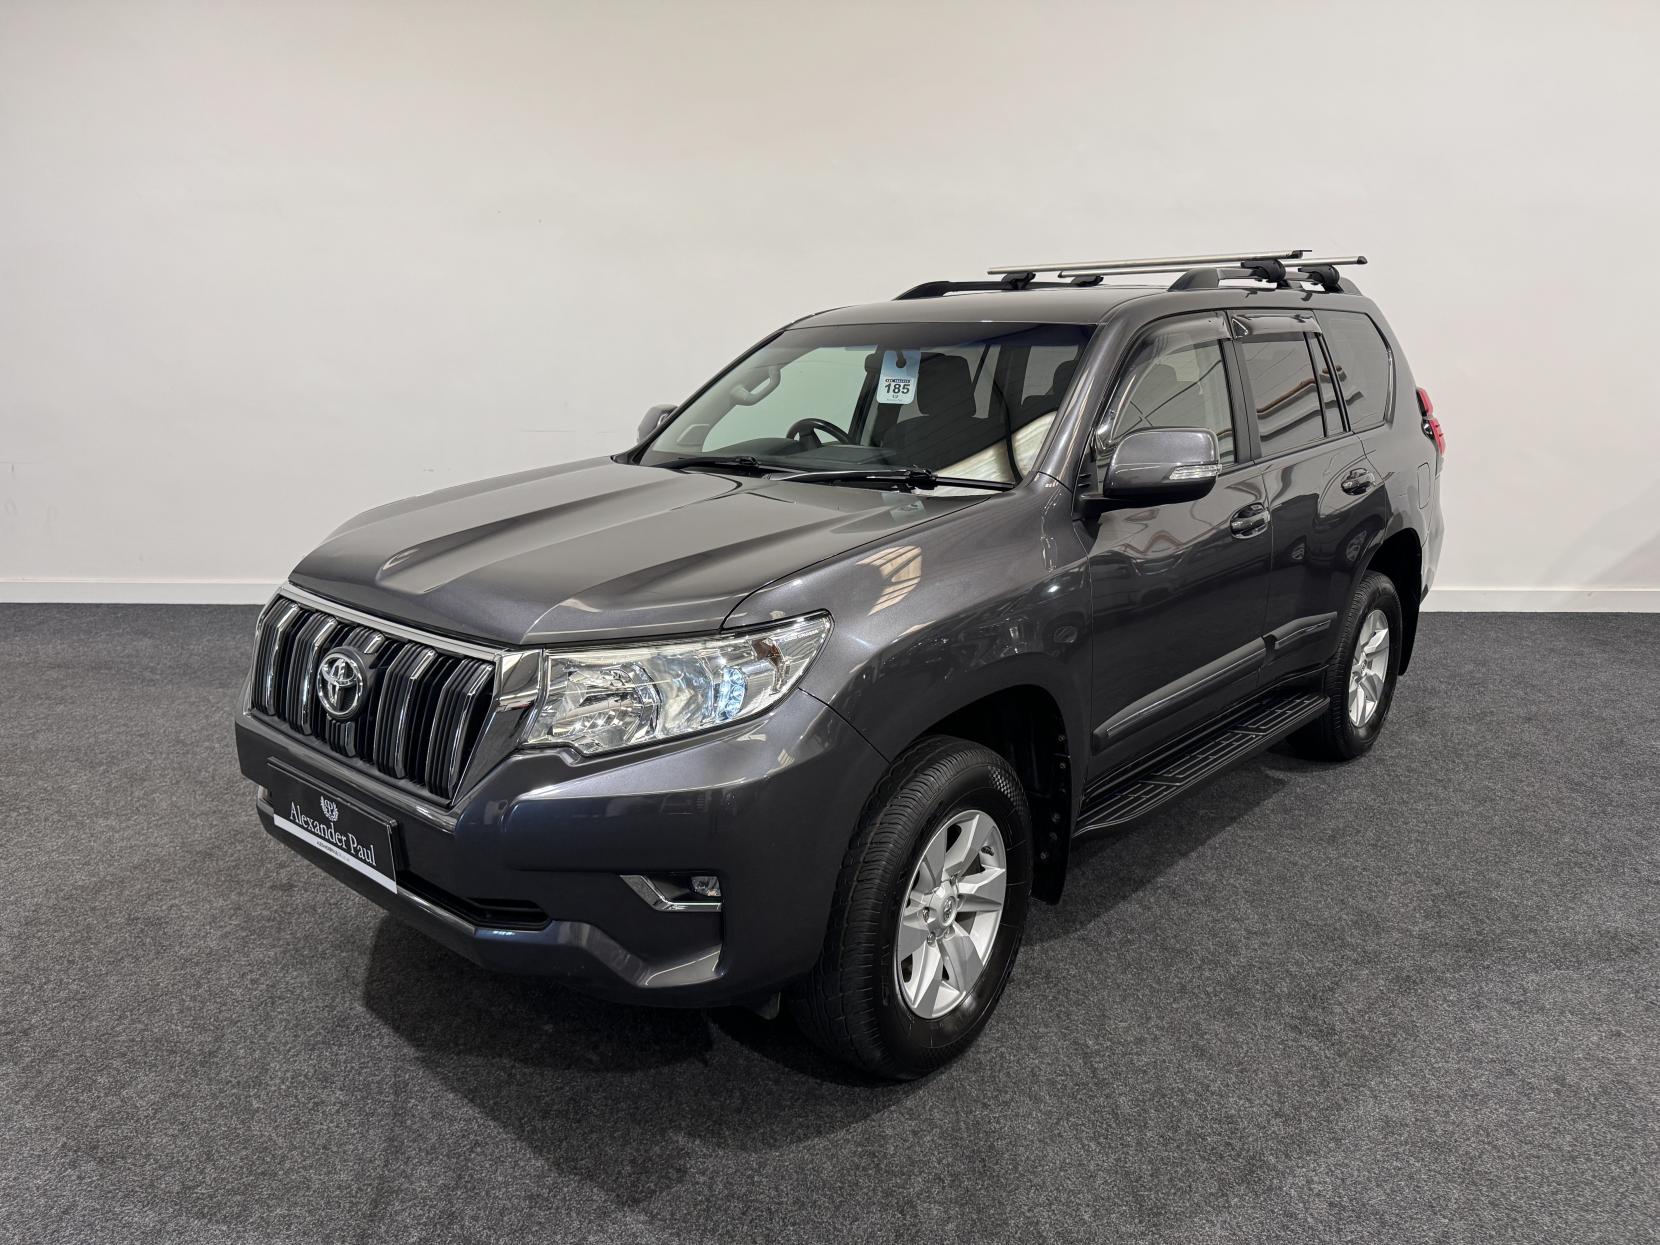 Toyota Land Cruiser 2.8D Active SUV 5dr Diesel Auto 4WD Euro 6 (7 Seat) (177 ps)